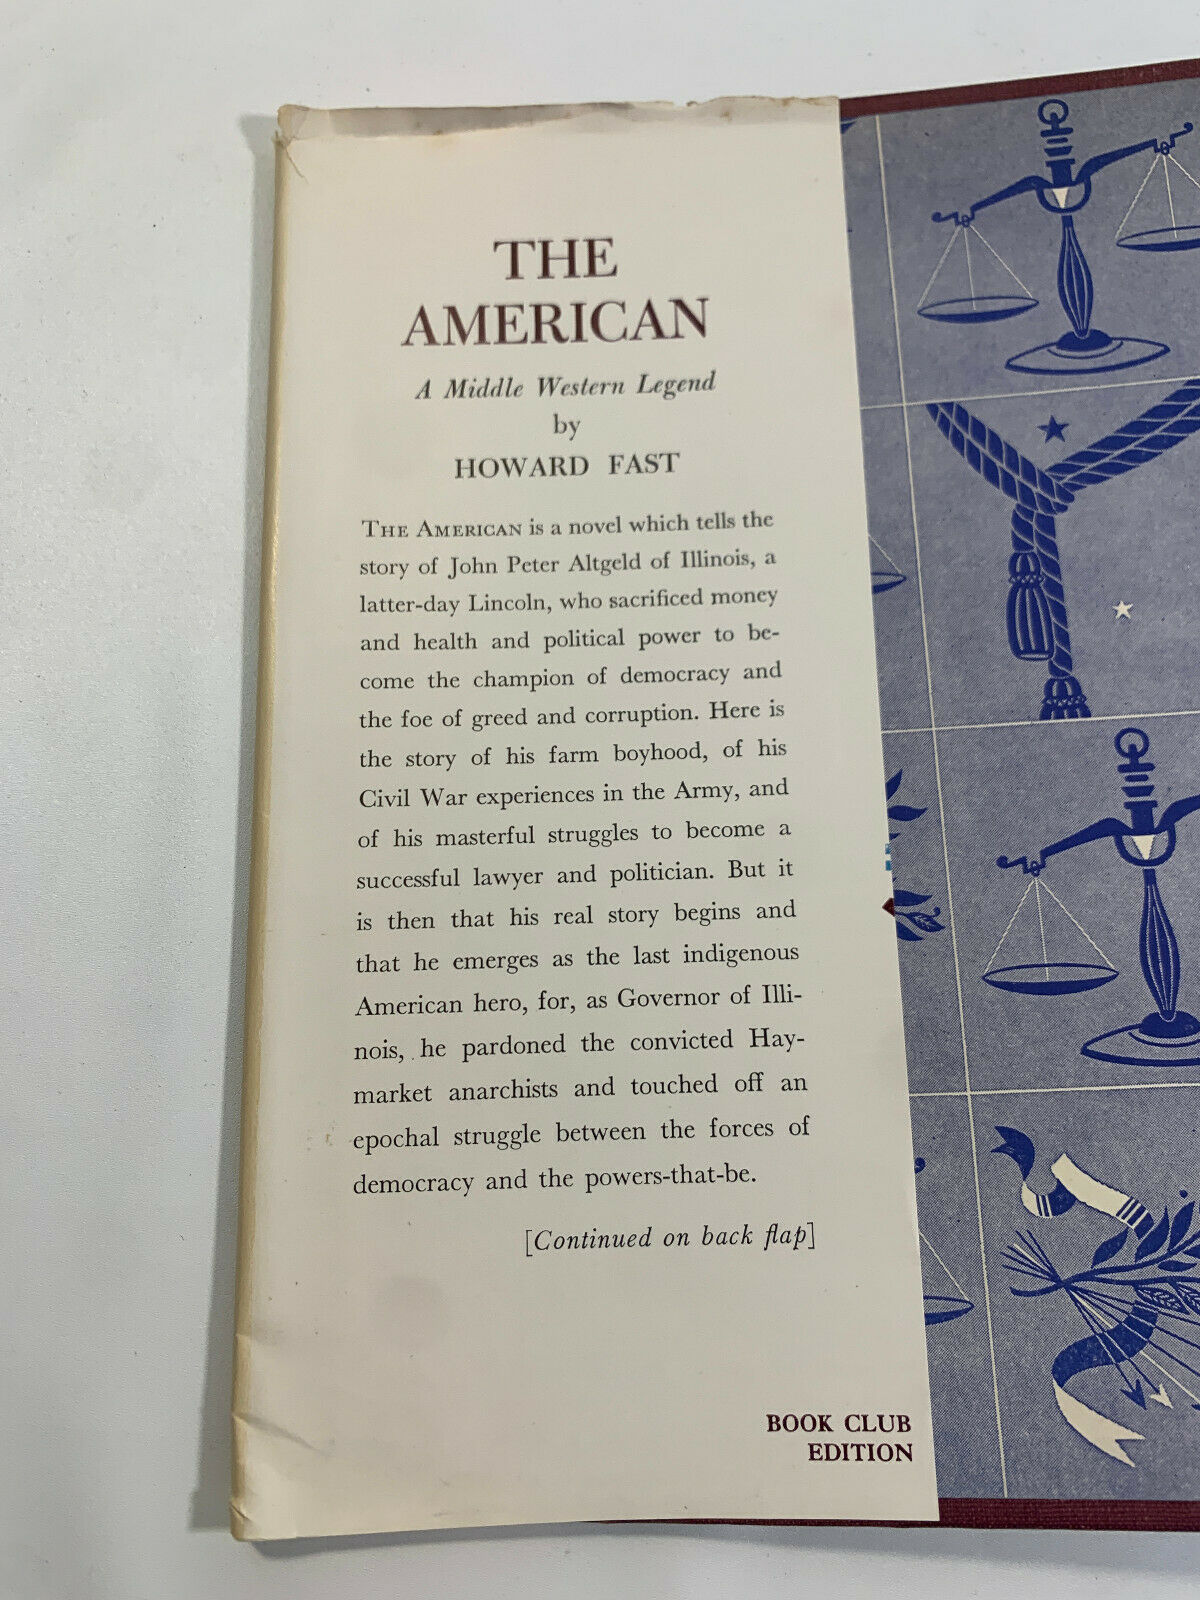 The American by Howard Fast ,1946, Hardcover  BCE (A1)